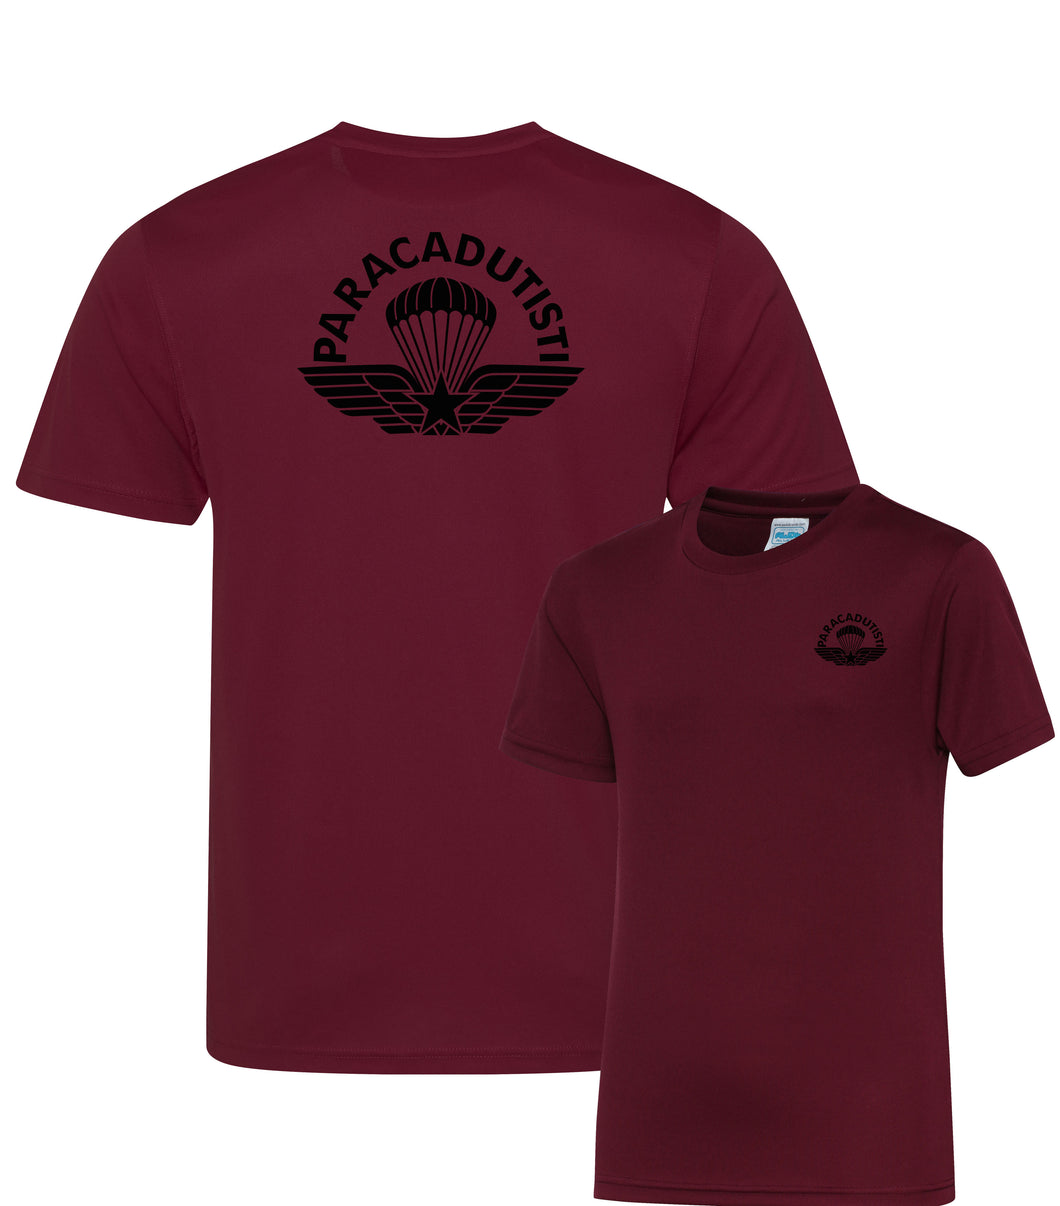 (Italian) paradutsi folgore Airborne forces Paratrooper  - Fully Printed Wicking Fabric T-shirt